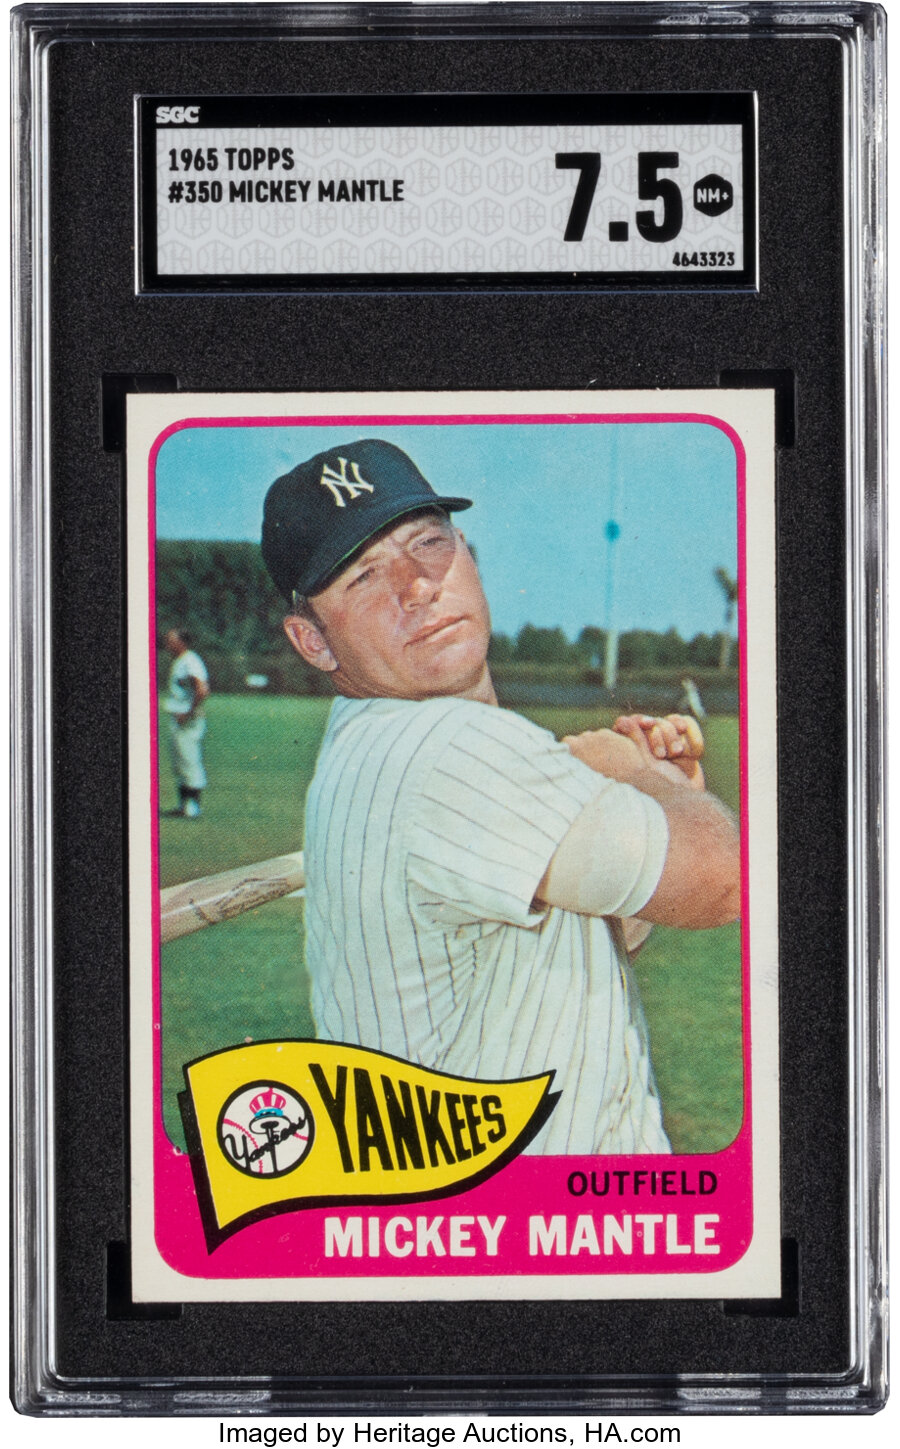 1965 Topps Mickey Mantle #350 SGC NM+ 7.5